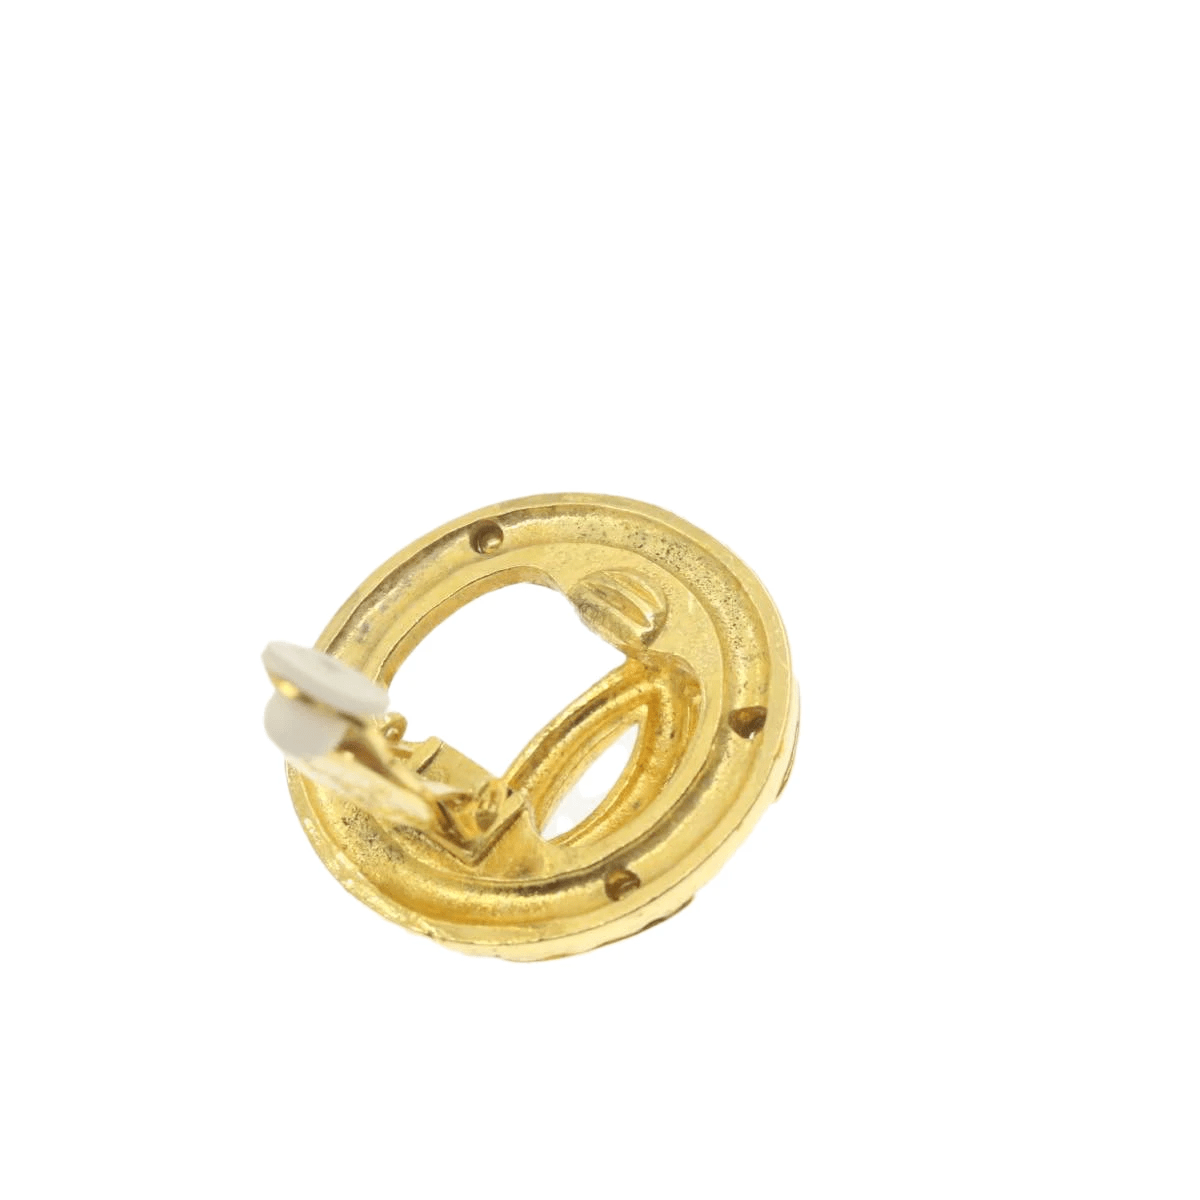 Chanel CHANEL CC Logo Clip on Earring Gold Tone Auth br212